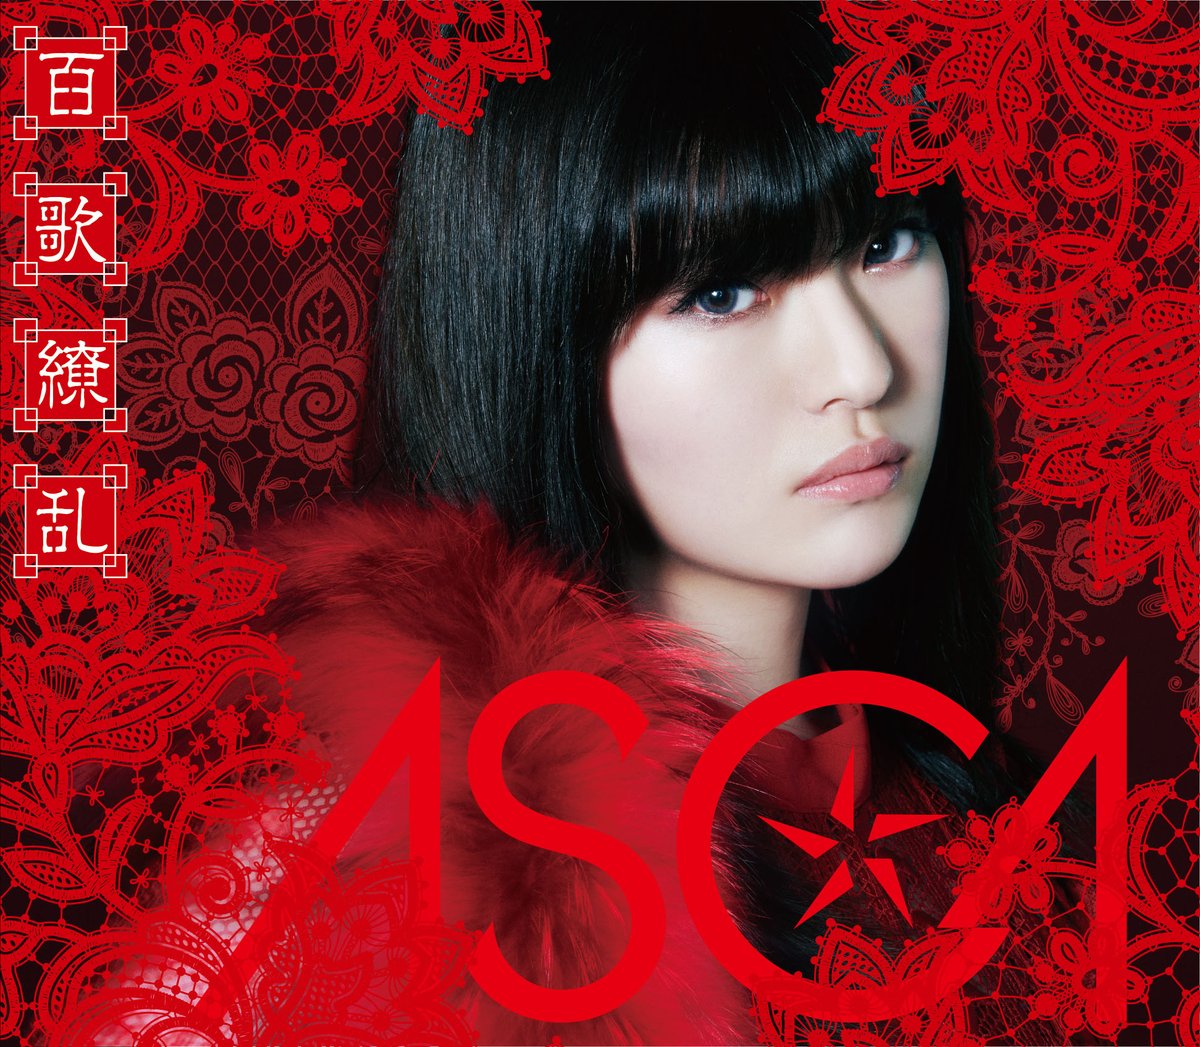 Cover for『ASCA - NO FAKE』from the release『Hyakka Ryouran』